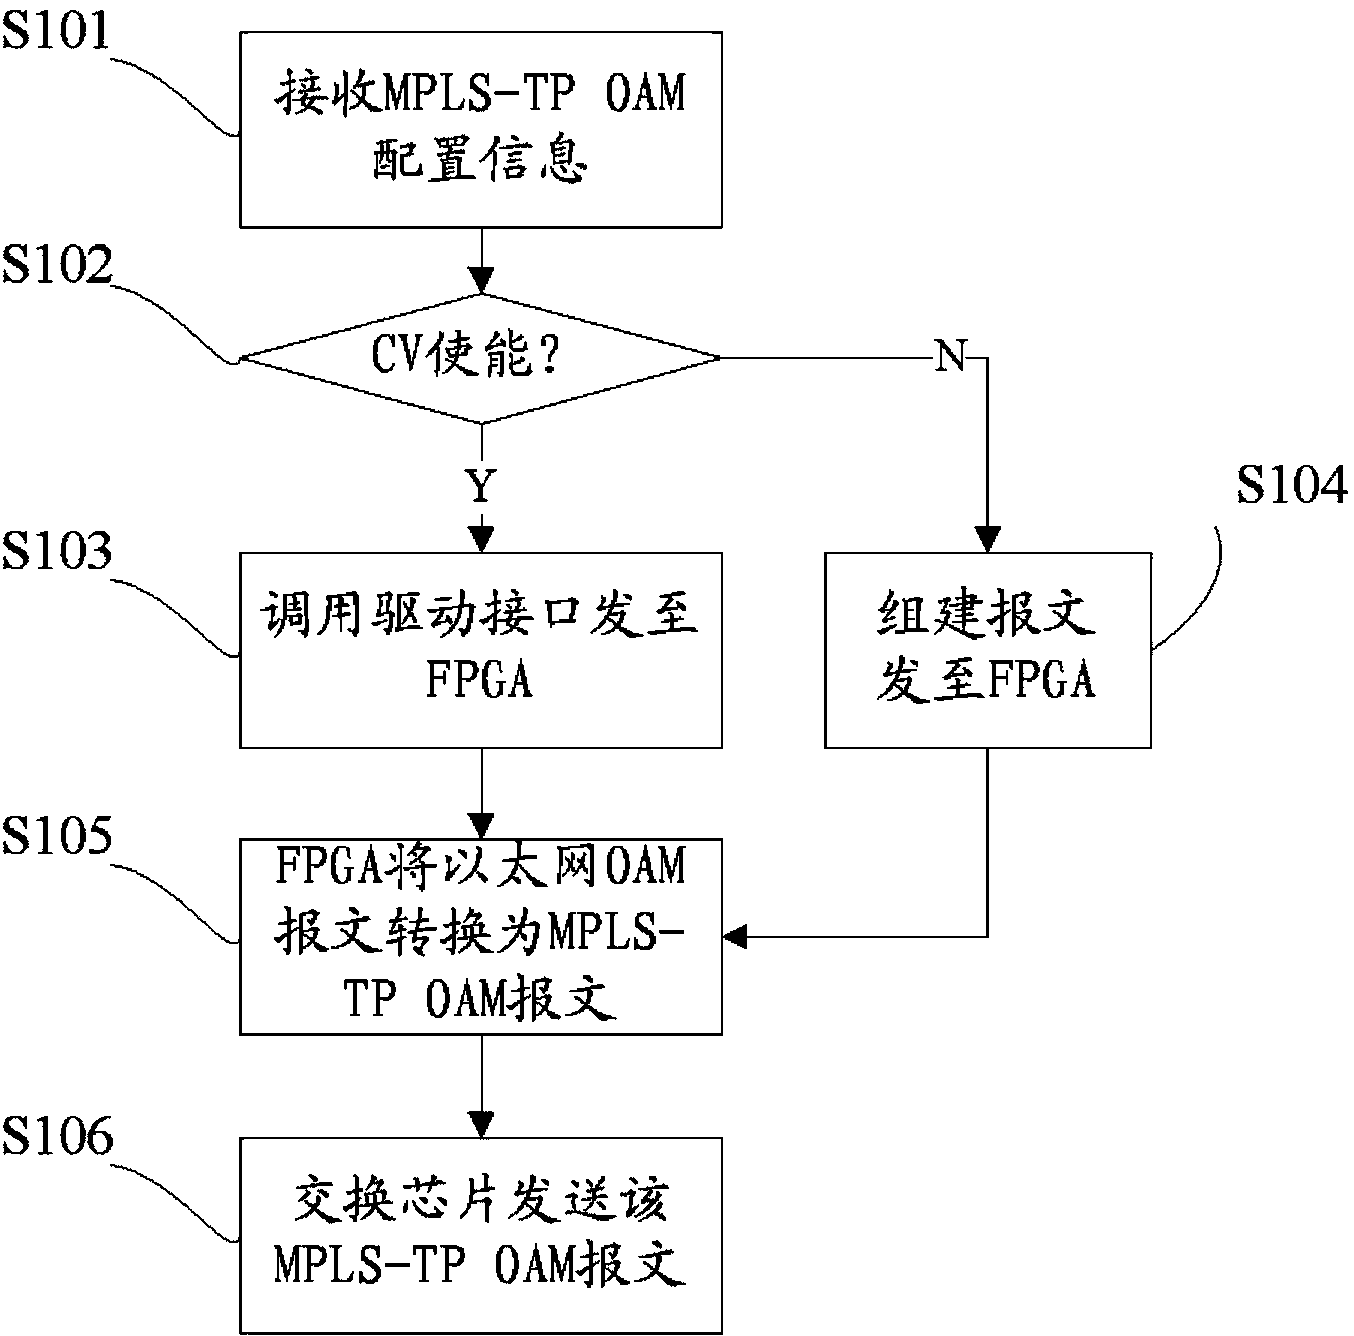 Methods and devices for sending and receiving messages